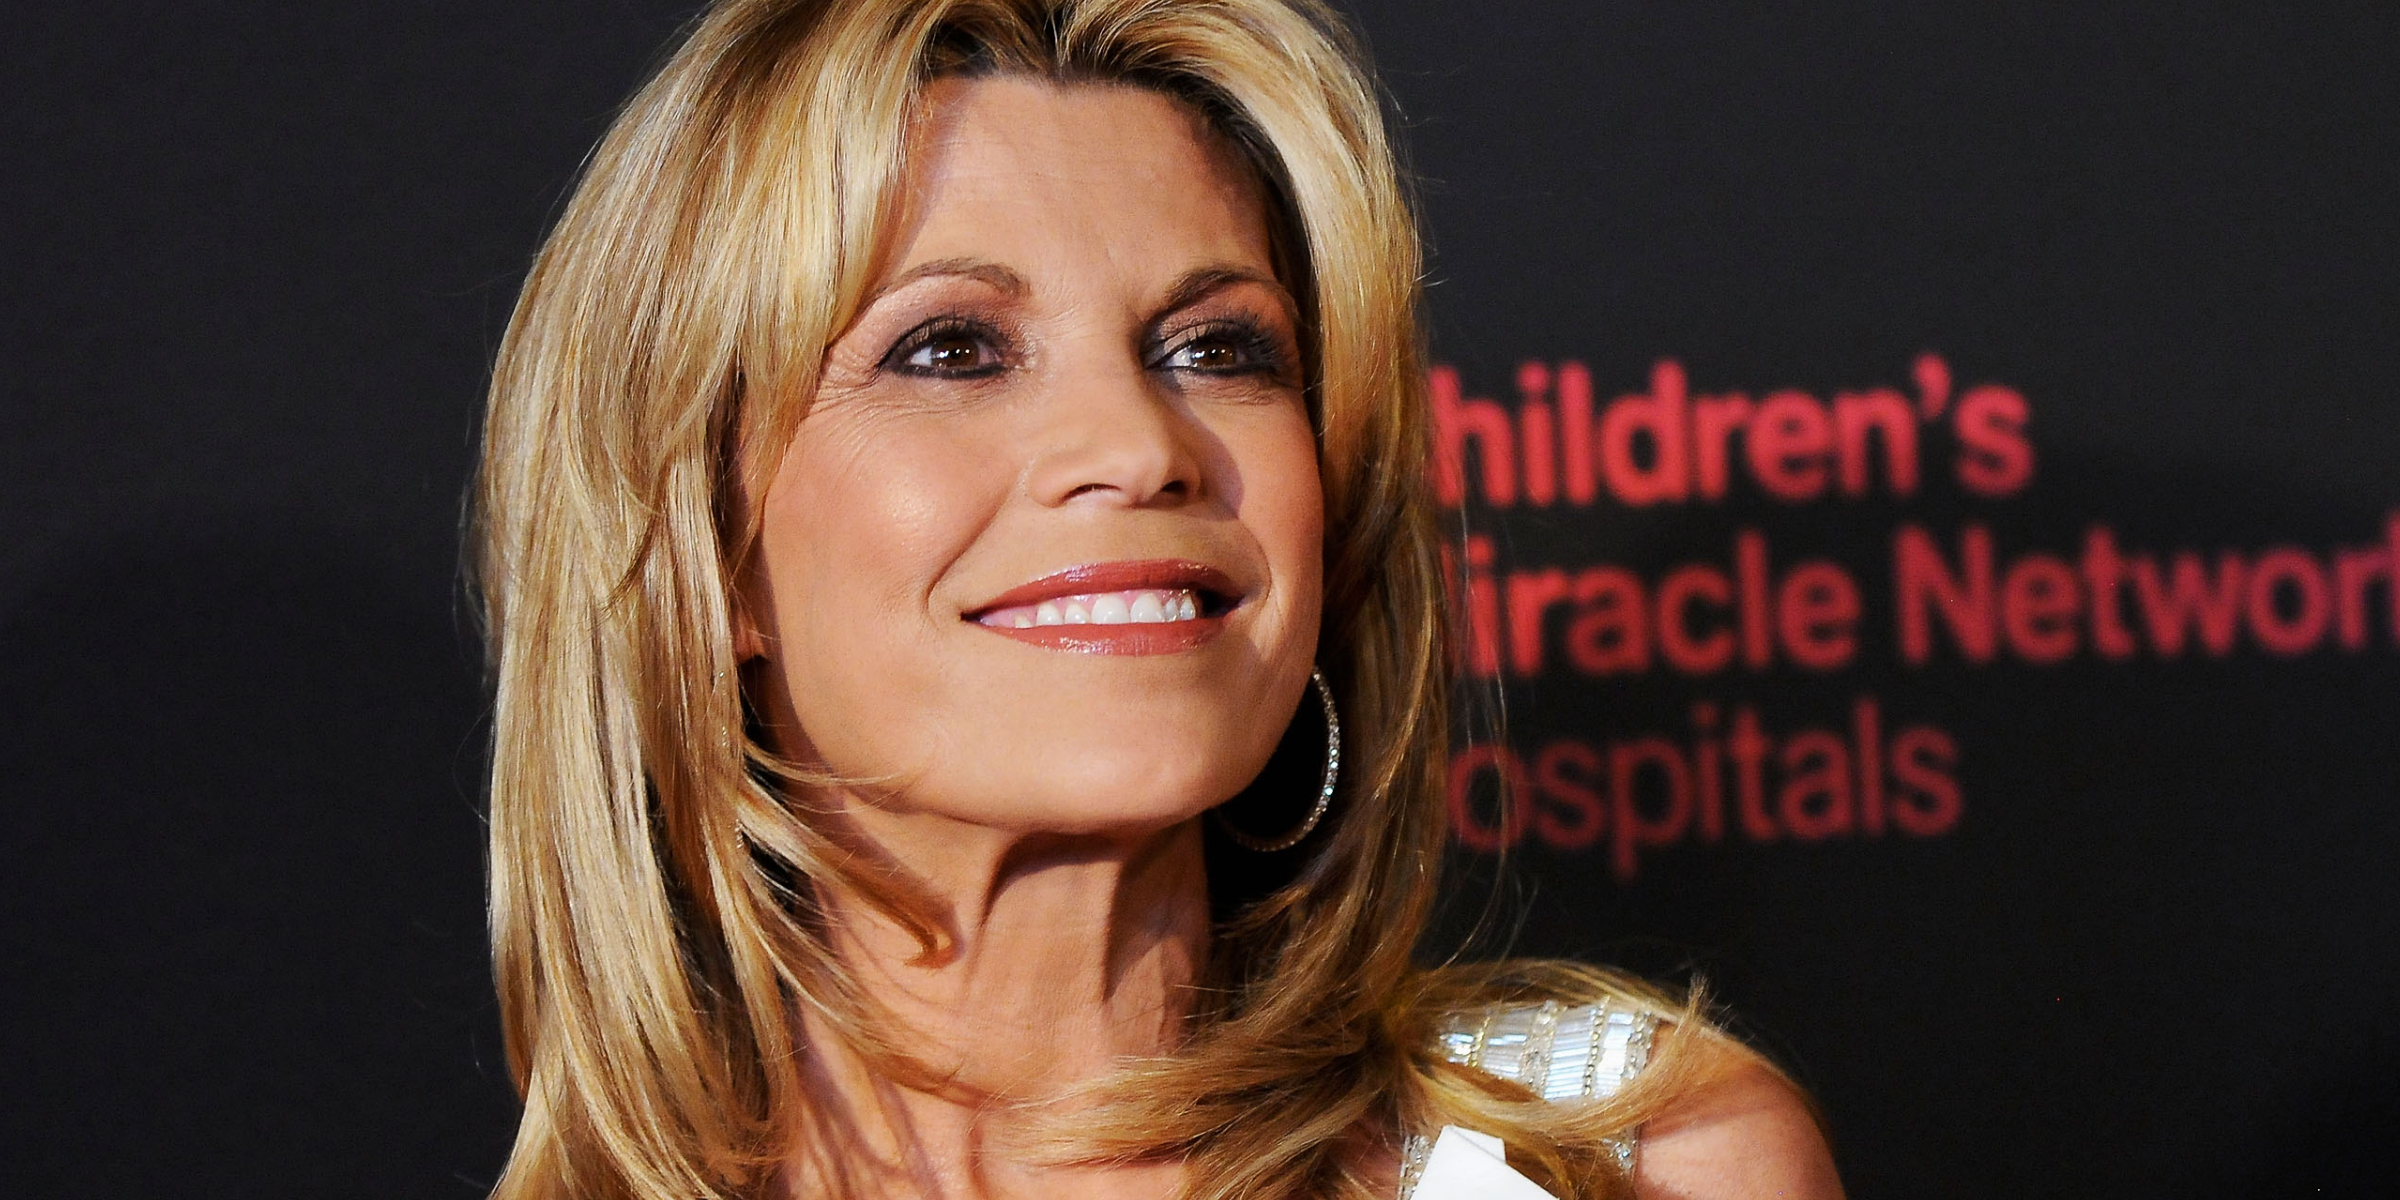 Vanna White | Source: Getty Images